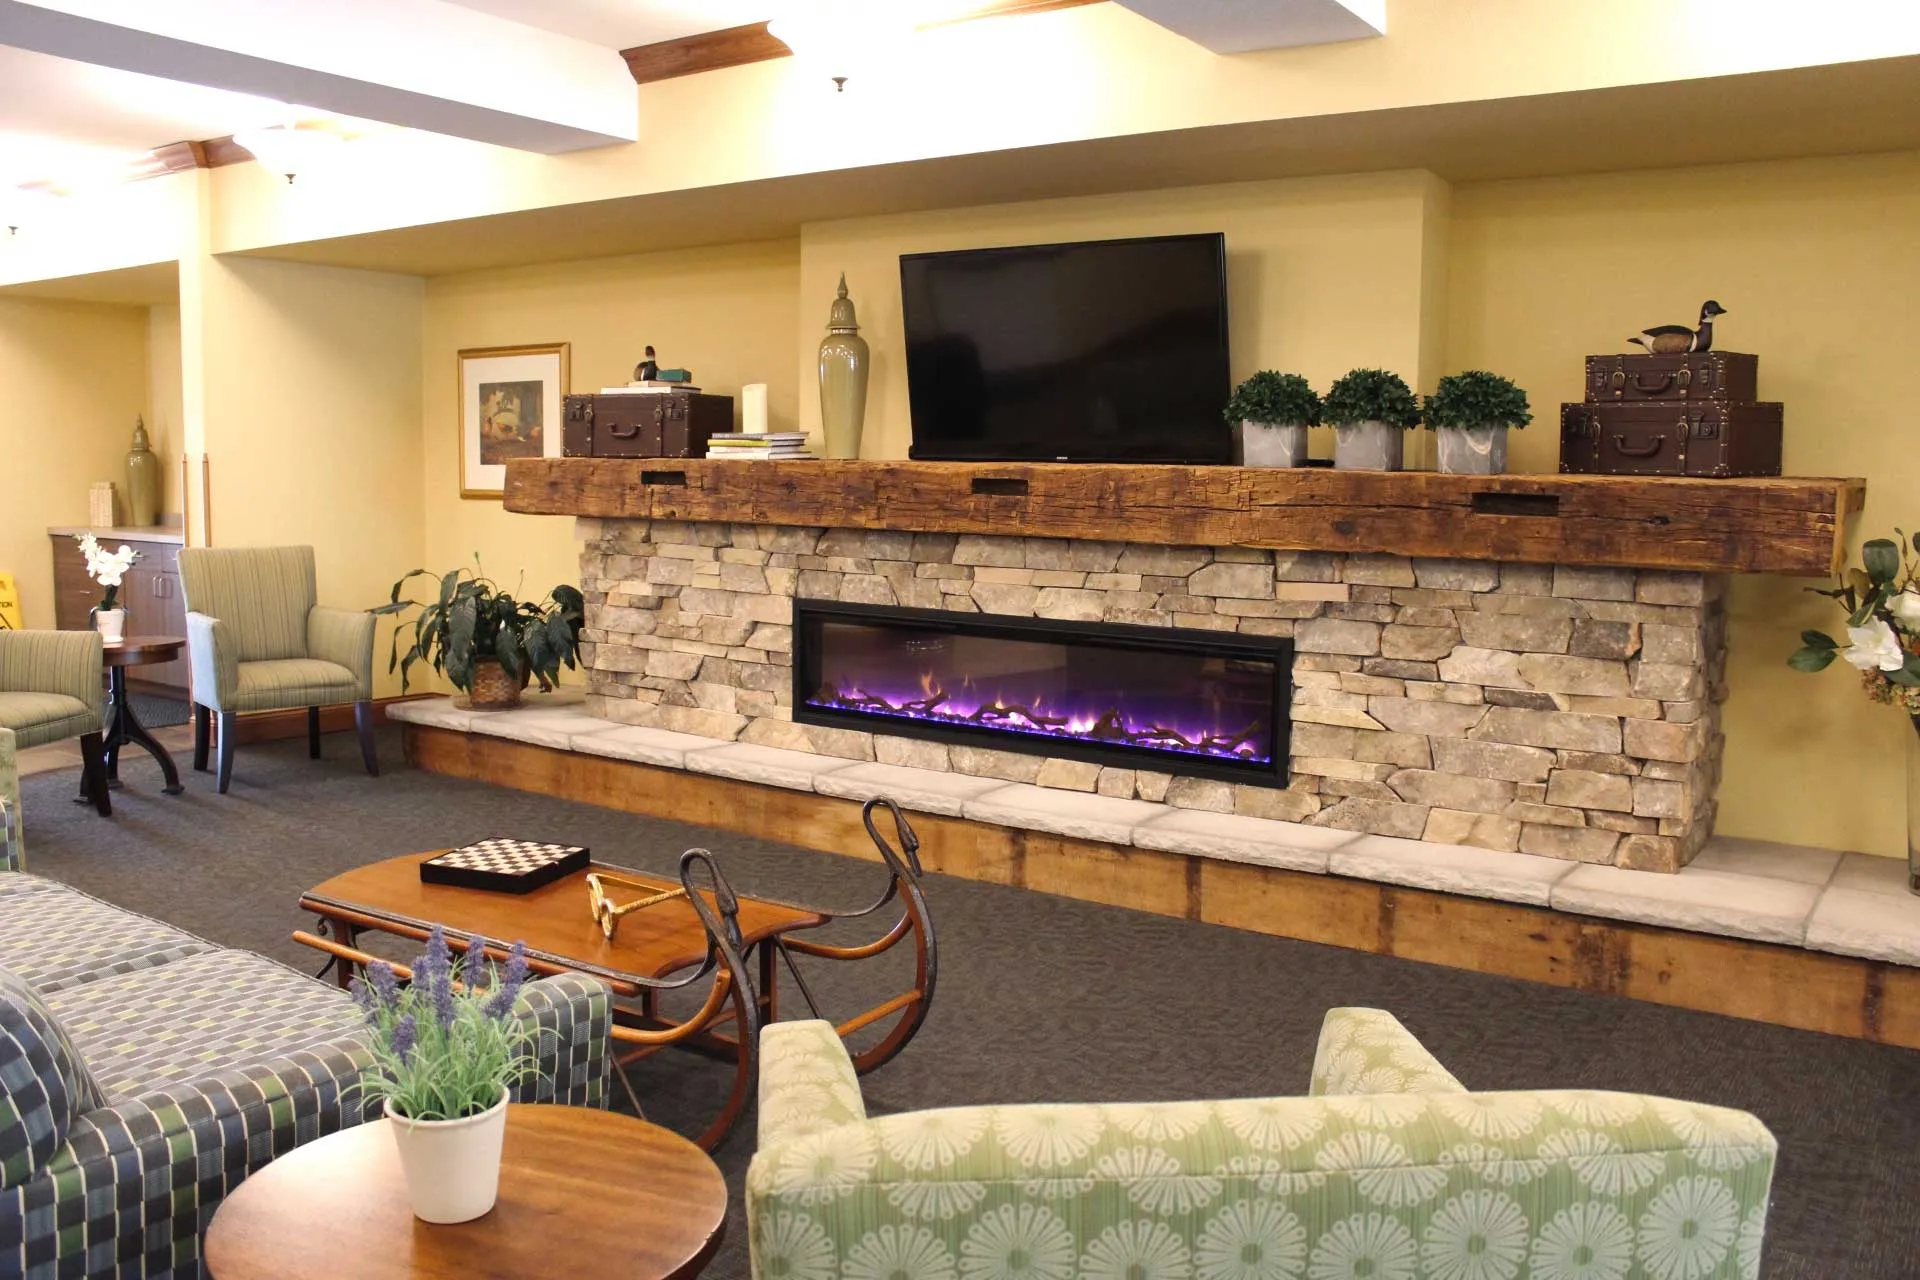 A cozy living room with a fireplace and TV, perfect for residents of independent living.